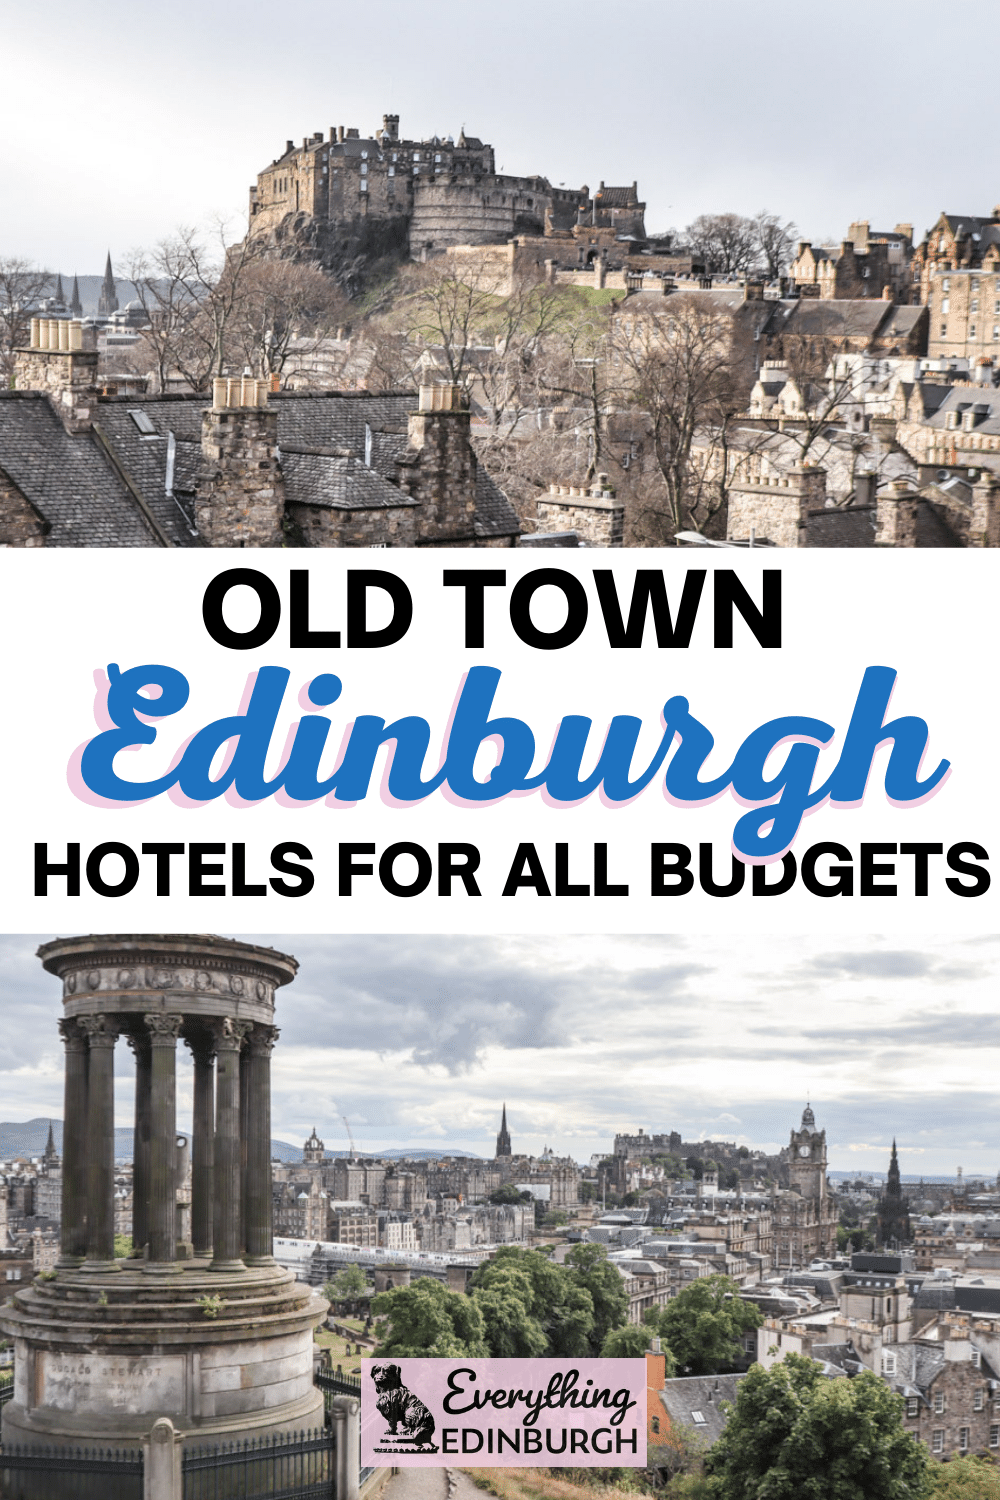 Wondering where to stay in Edinburgh? This guide to the best Edinburgh hotels in the Old Town reveals accommodation to meet every budget. From suites with free standing baths to affordable rooms smack bang in the action. Click to find out more.Wondering where to stay in Edinburgh? This guide to the best Edinburgh hotels in the Old Town reveals accommodation to meet every budget. From suites with free standing baths to affordable rooms smack bang in the action. Click to find out more.